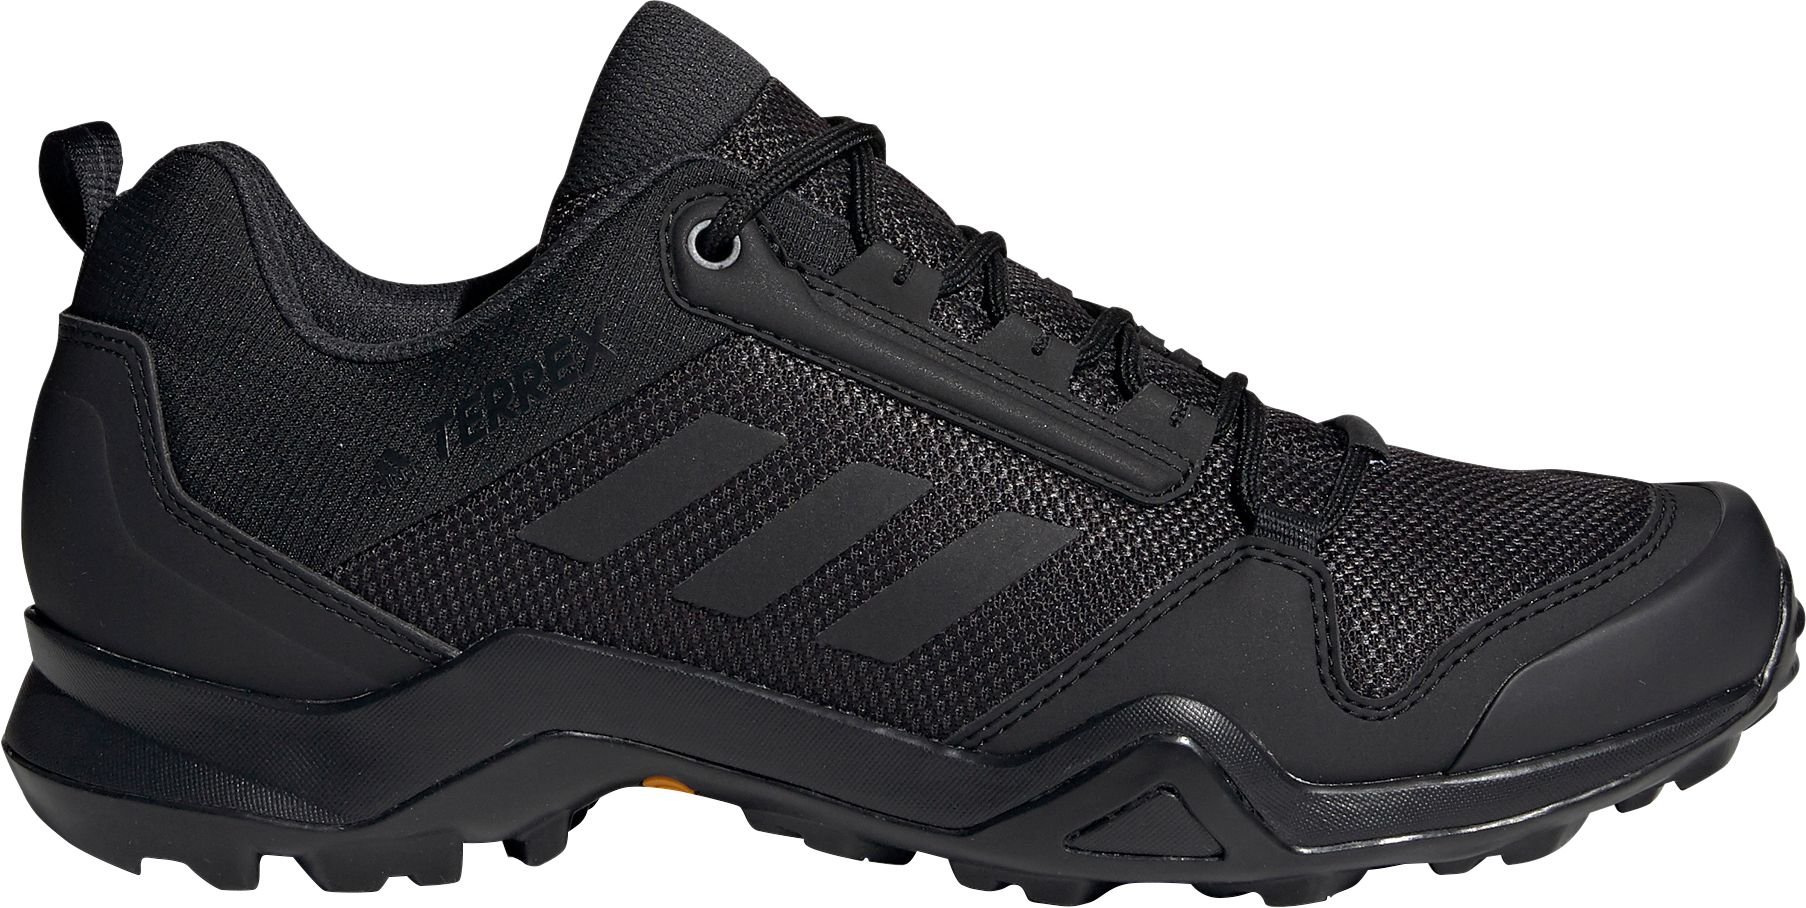 all black hiking shoes